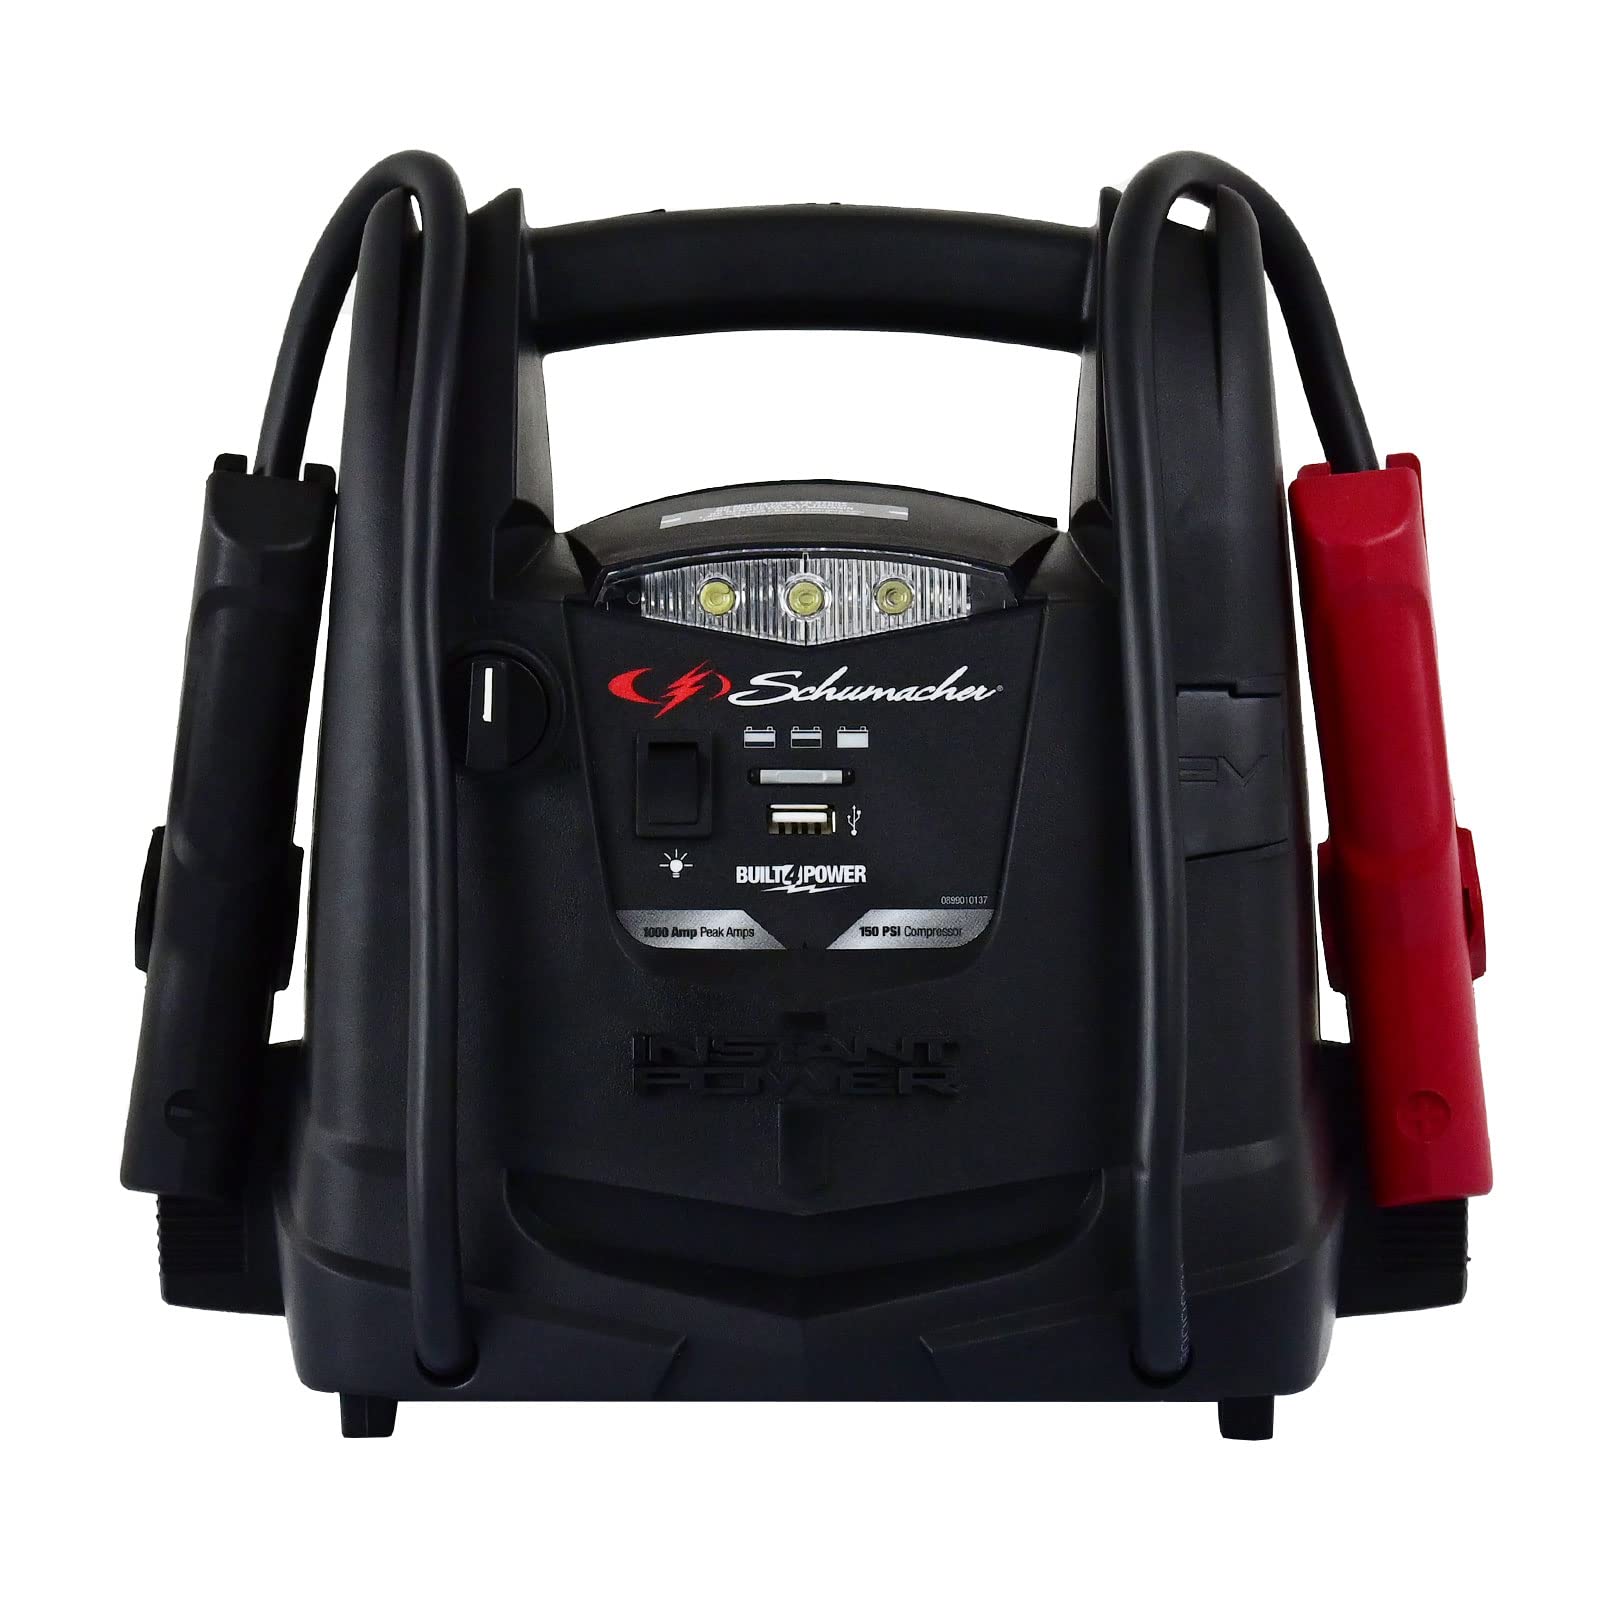 Schumacher SJ1330 Rechargeable AGM Jump Starter for Gas, Diesel Vehicles - 1000 Amps with Air Compressor and 12V DC, USB Power Station $68.32